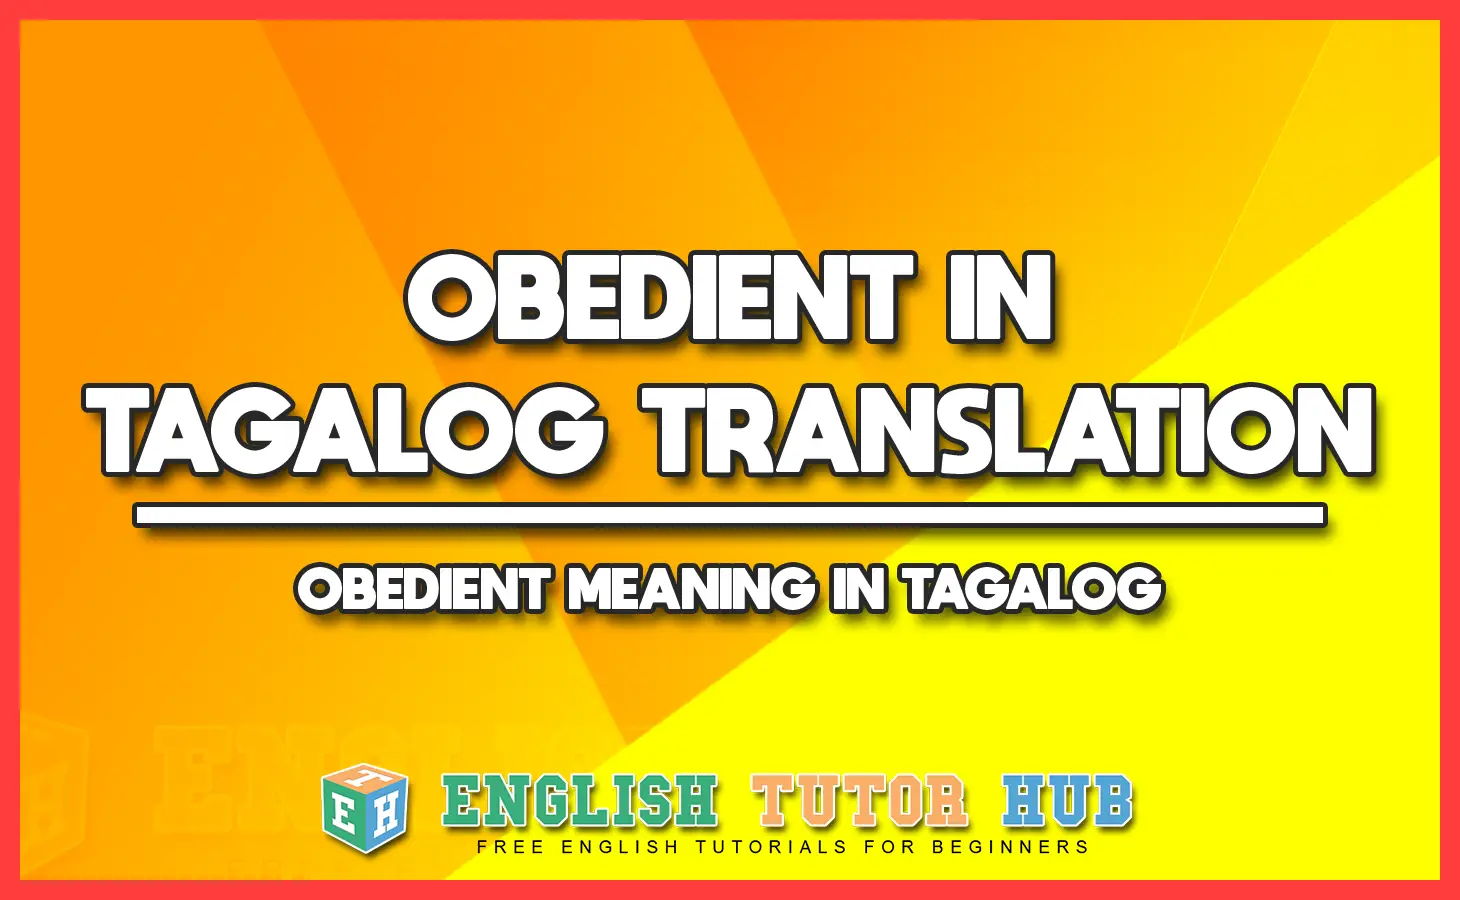 OBEDIENT IN TAGALOG TRANSLATION - OBEDIENT MEANING IN TAGALOG